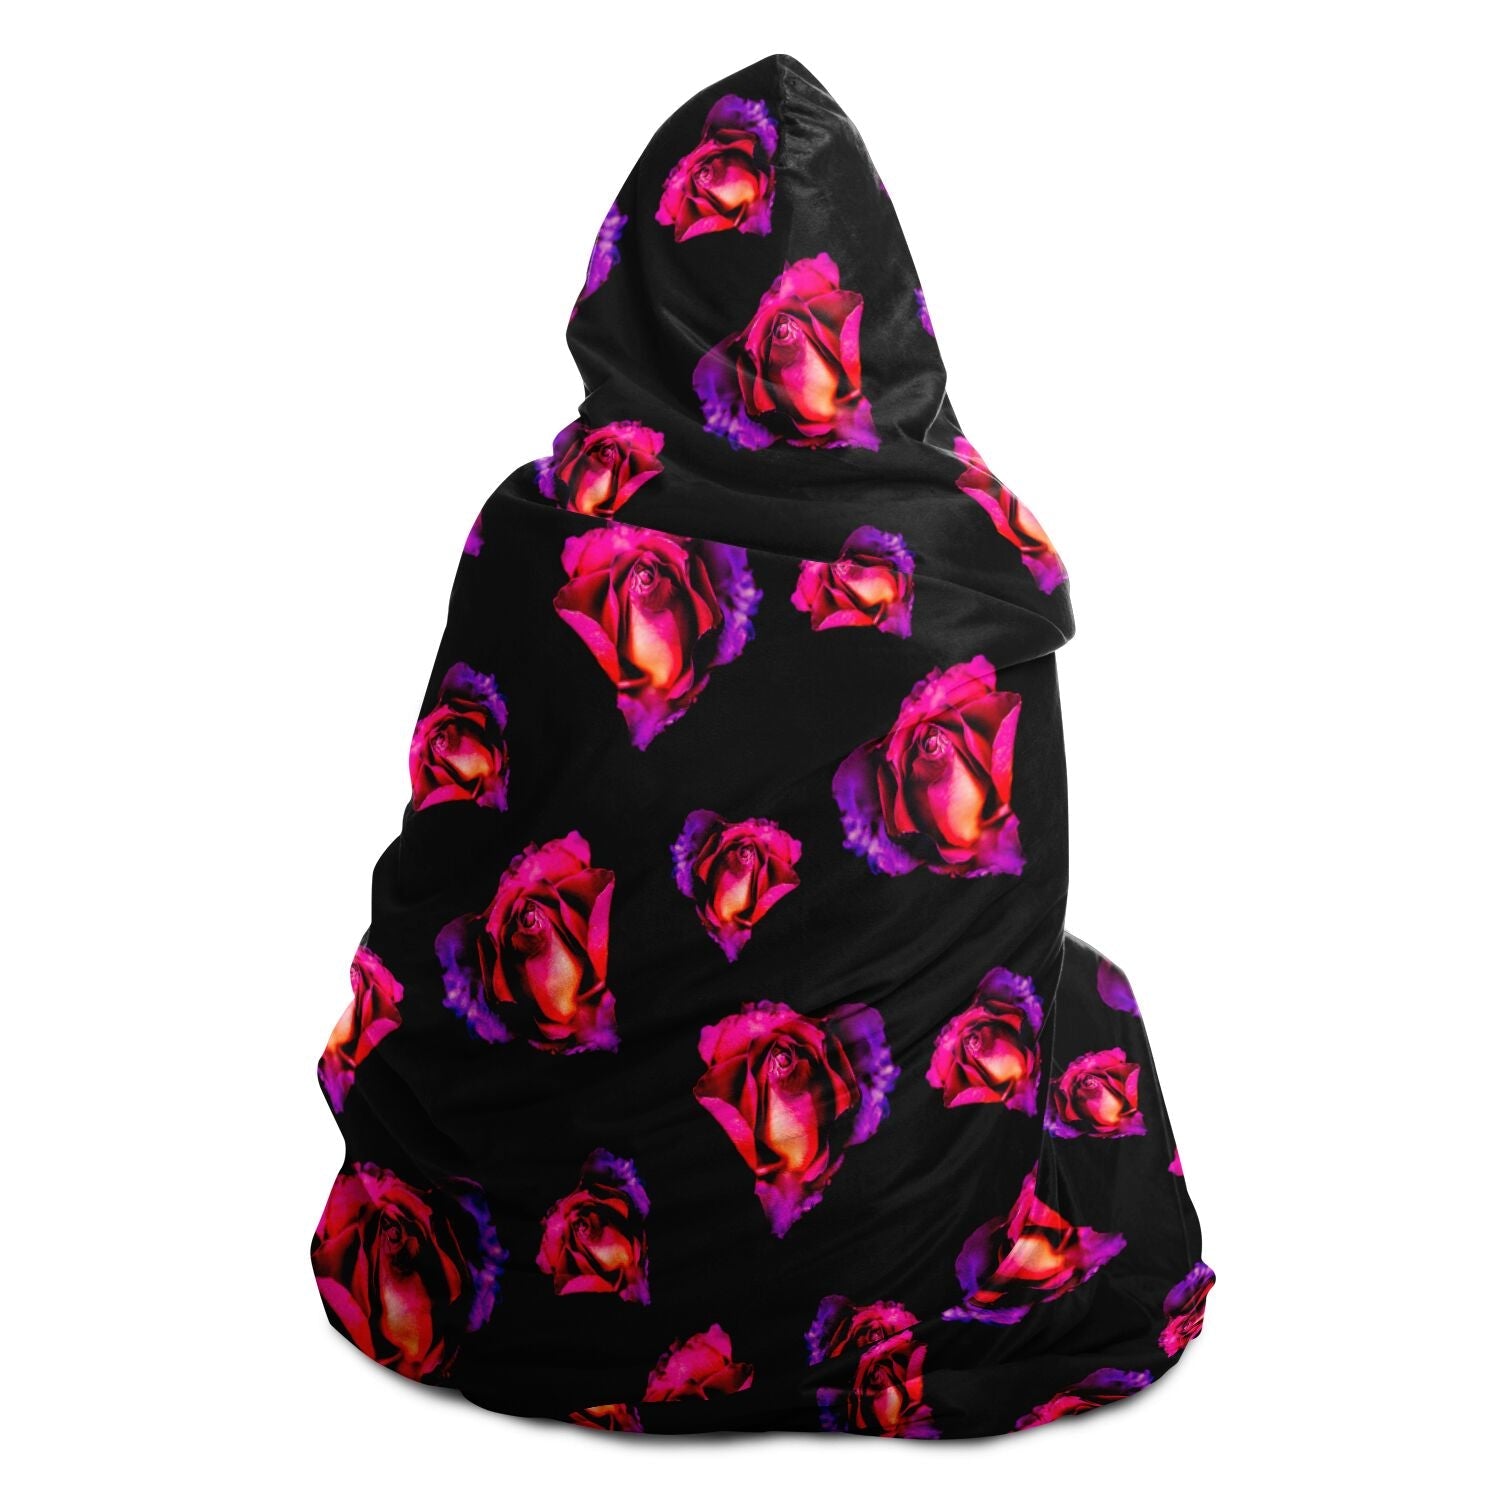 Kiss From A Rose Hooded Blanket (Available in Premium Sherpa & Micro Fleece) - The Grateful Hearts